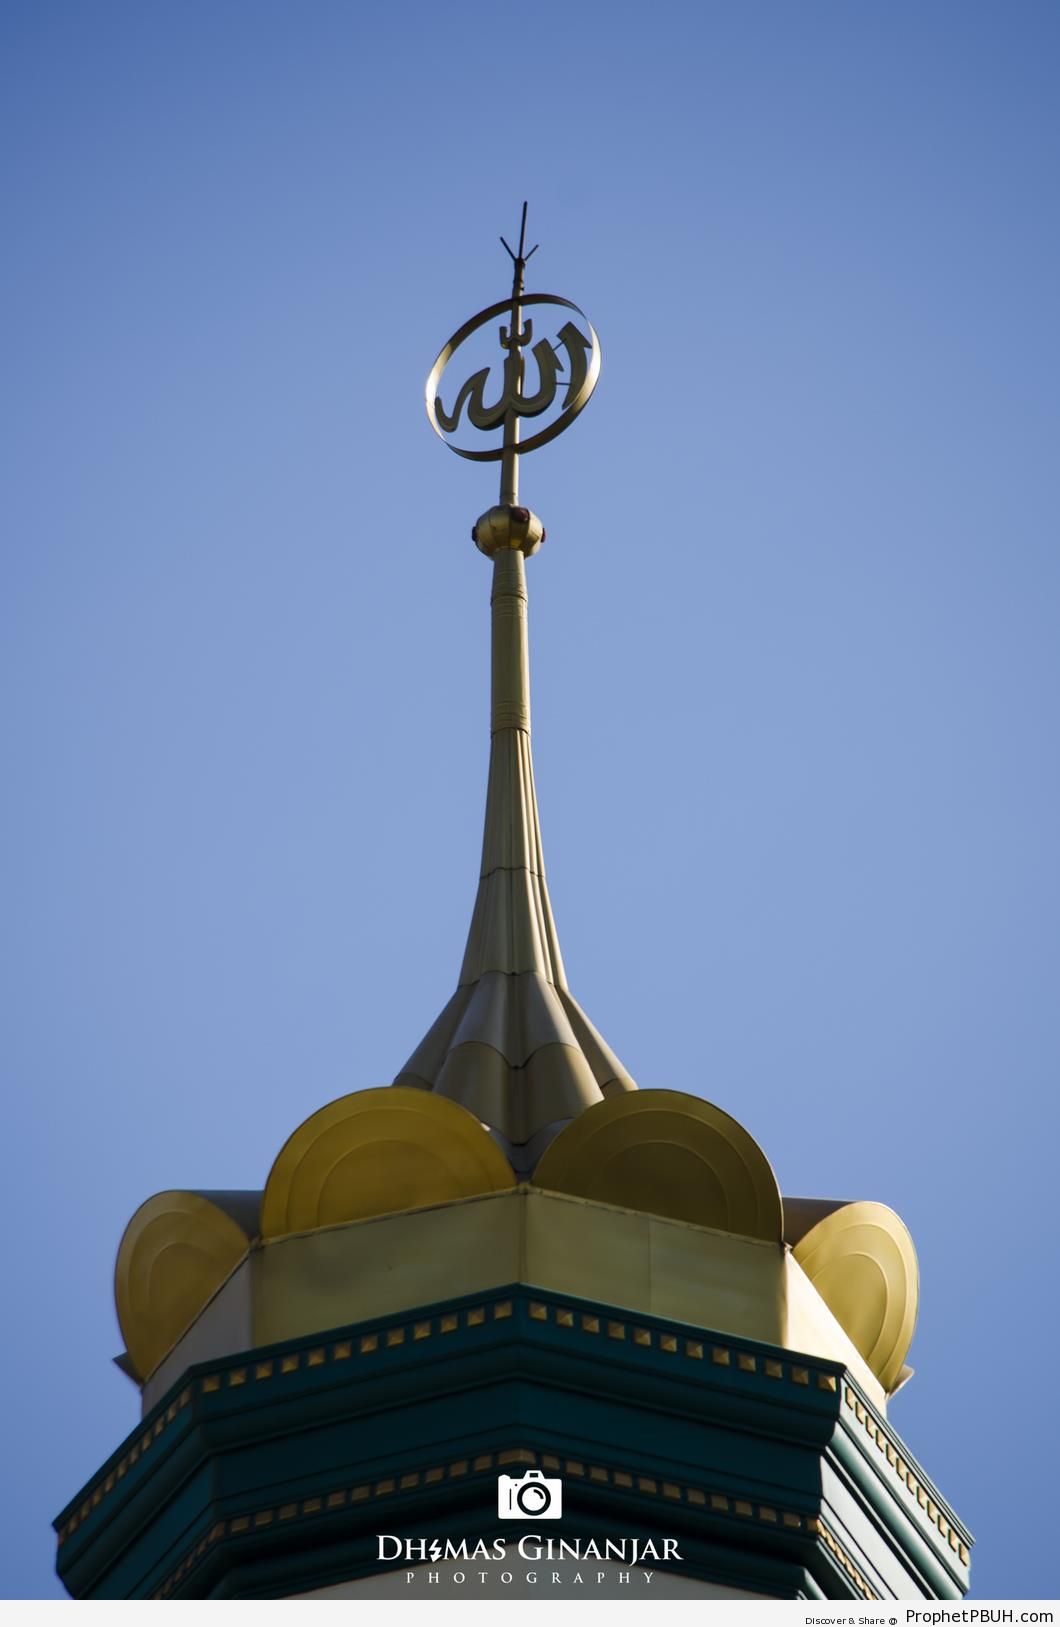 Allah Calligraphy on Top of Minaret - Allah Calligraphy and Typography 